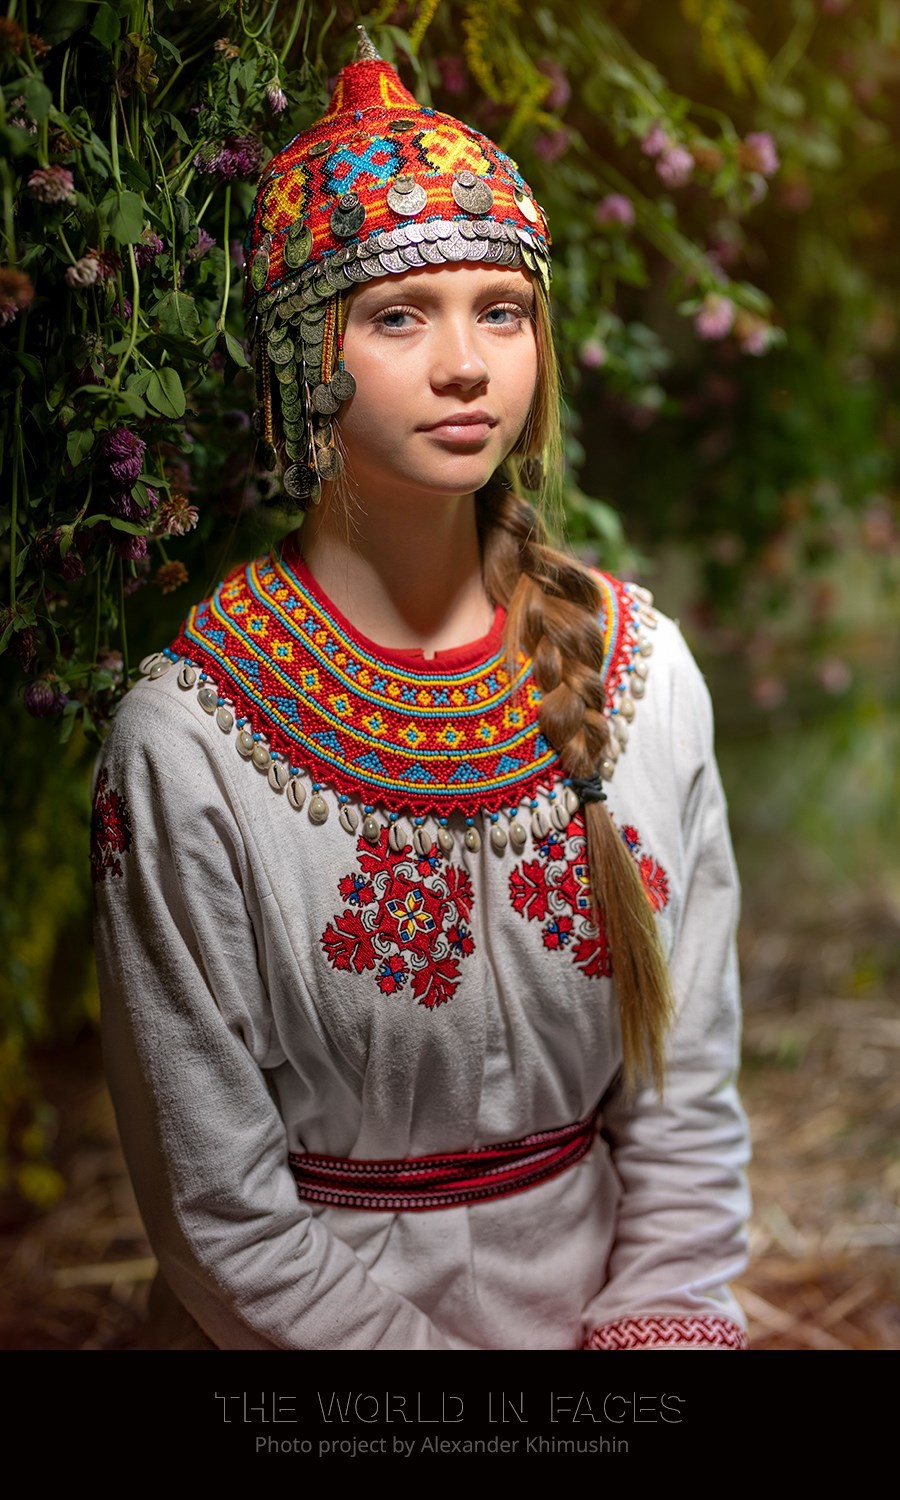 A young woman from Chuvashia.
